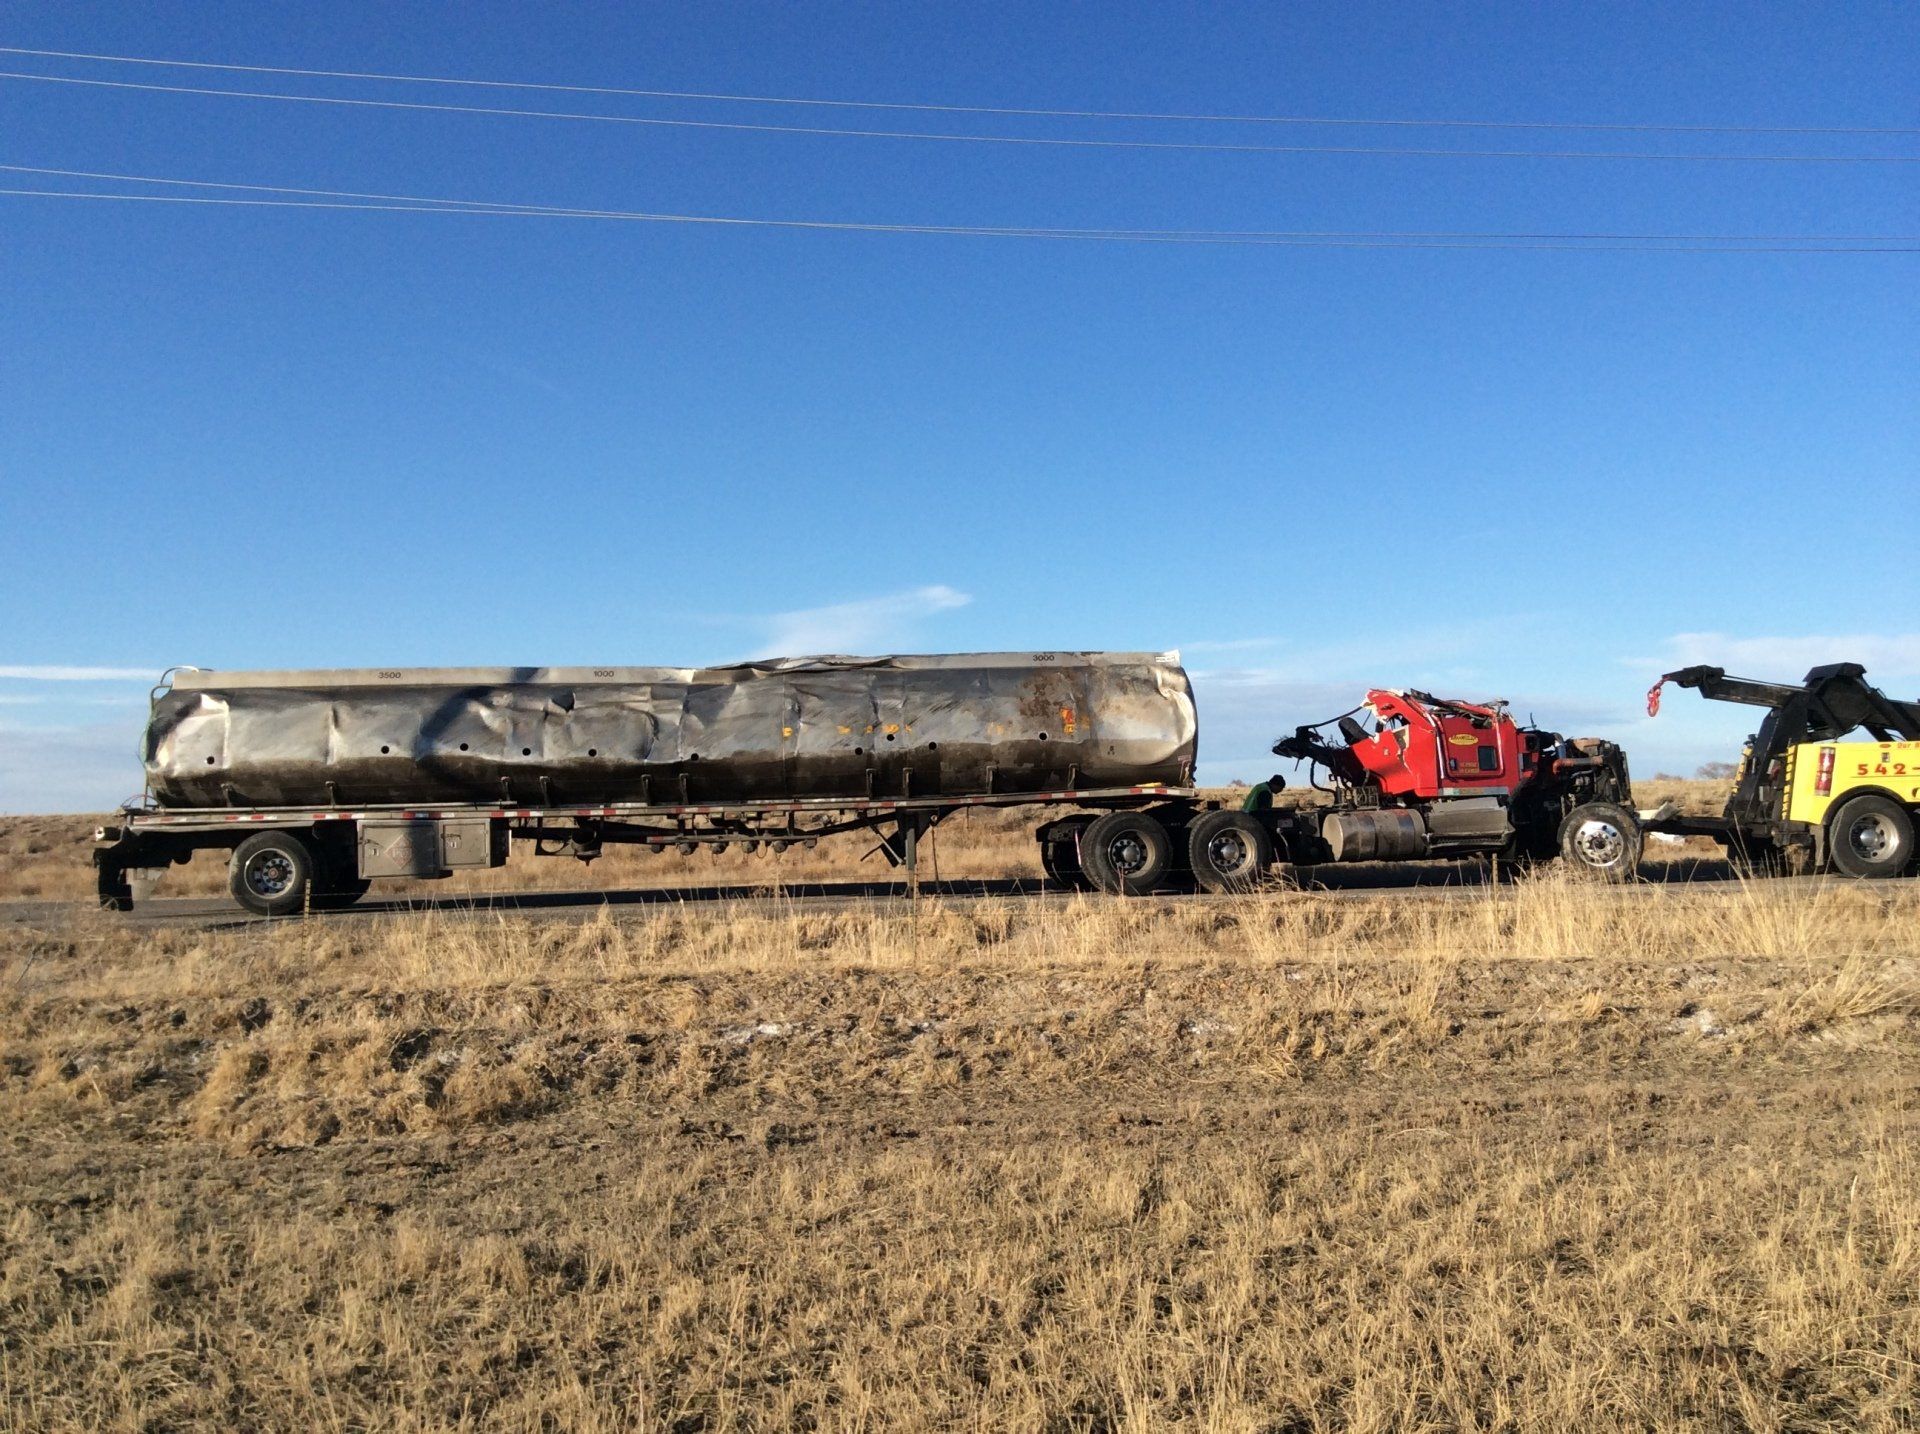 Tow Truck Pulling Semi With Tanker - Tow Truck Services in Pueblo,CO and the Surrounding Area